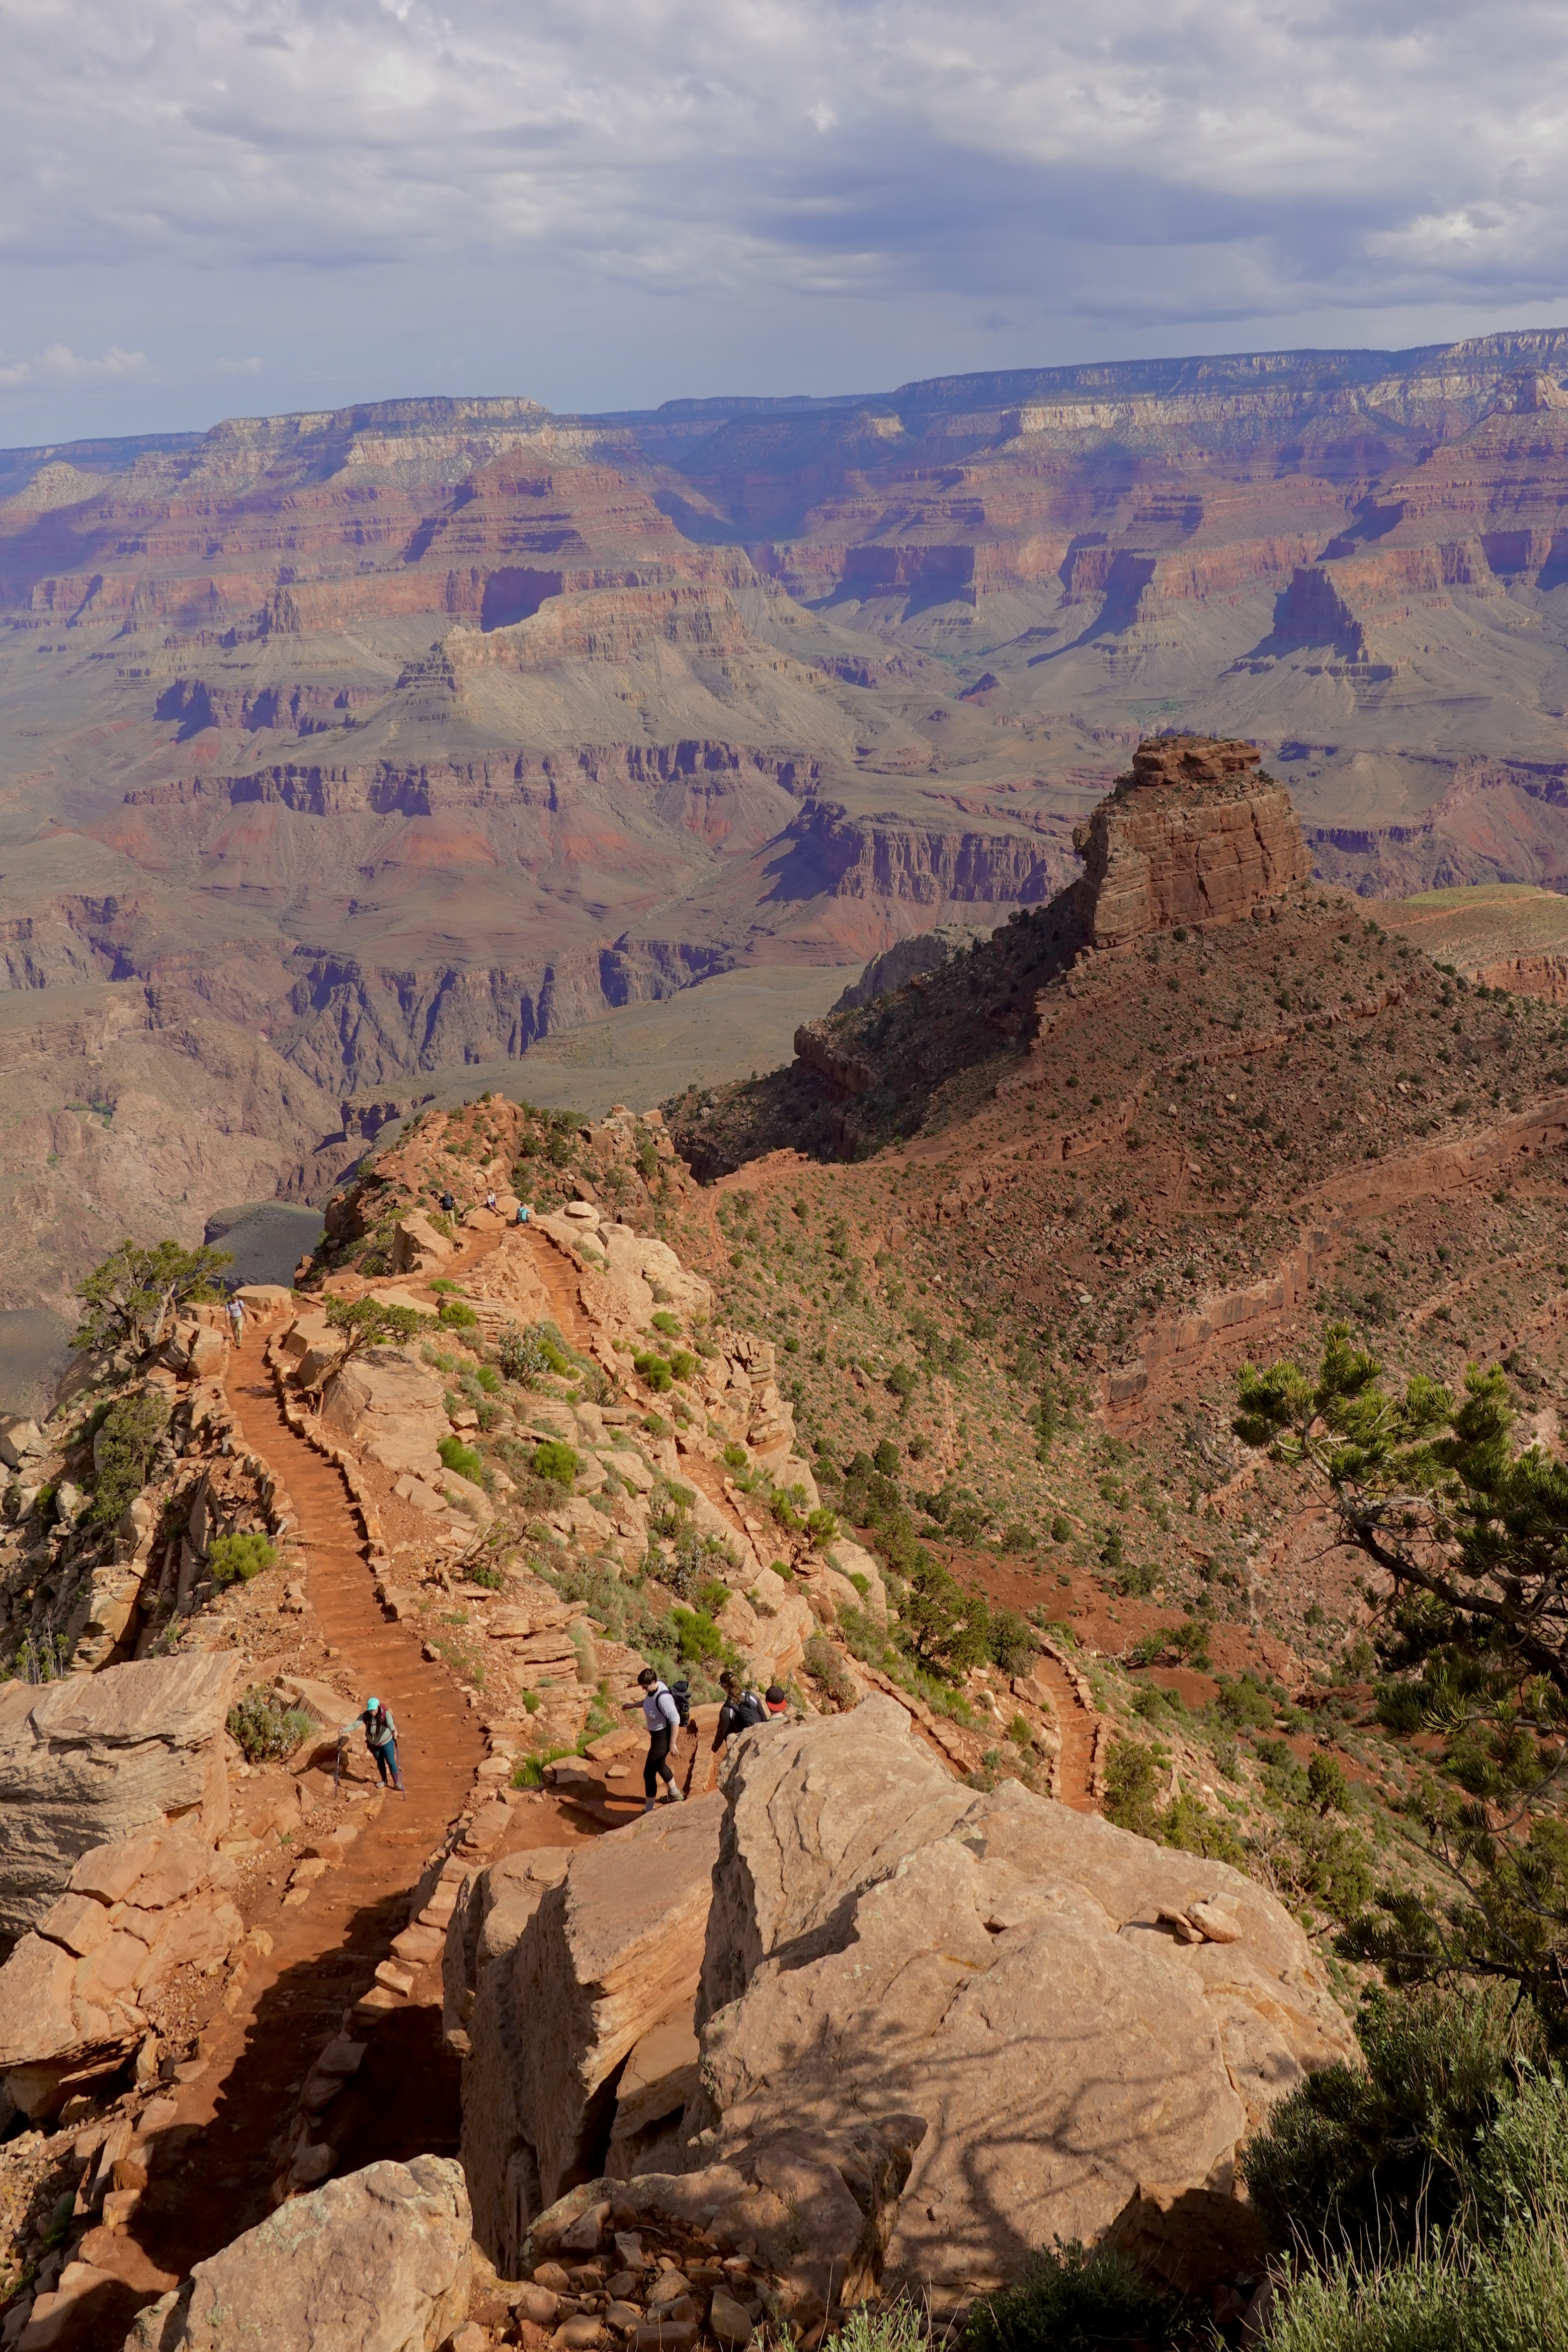 People Walking on the Ridge of the Grand Canyon